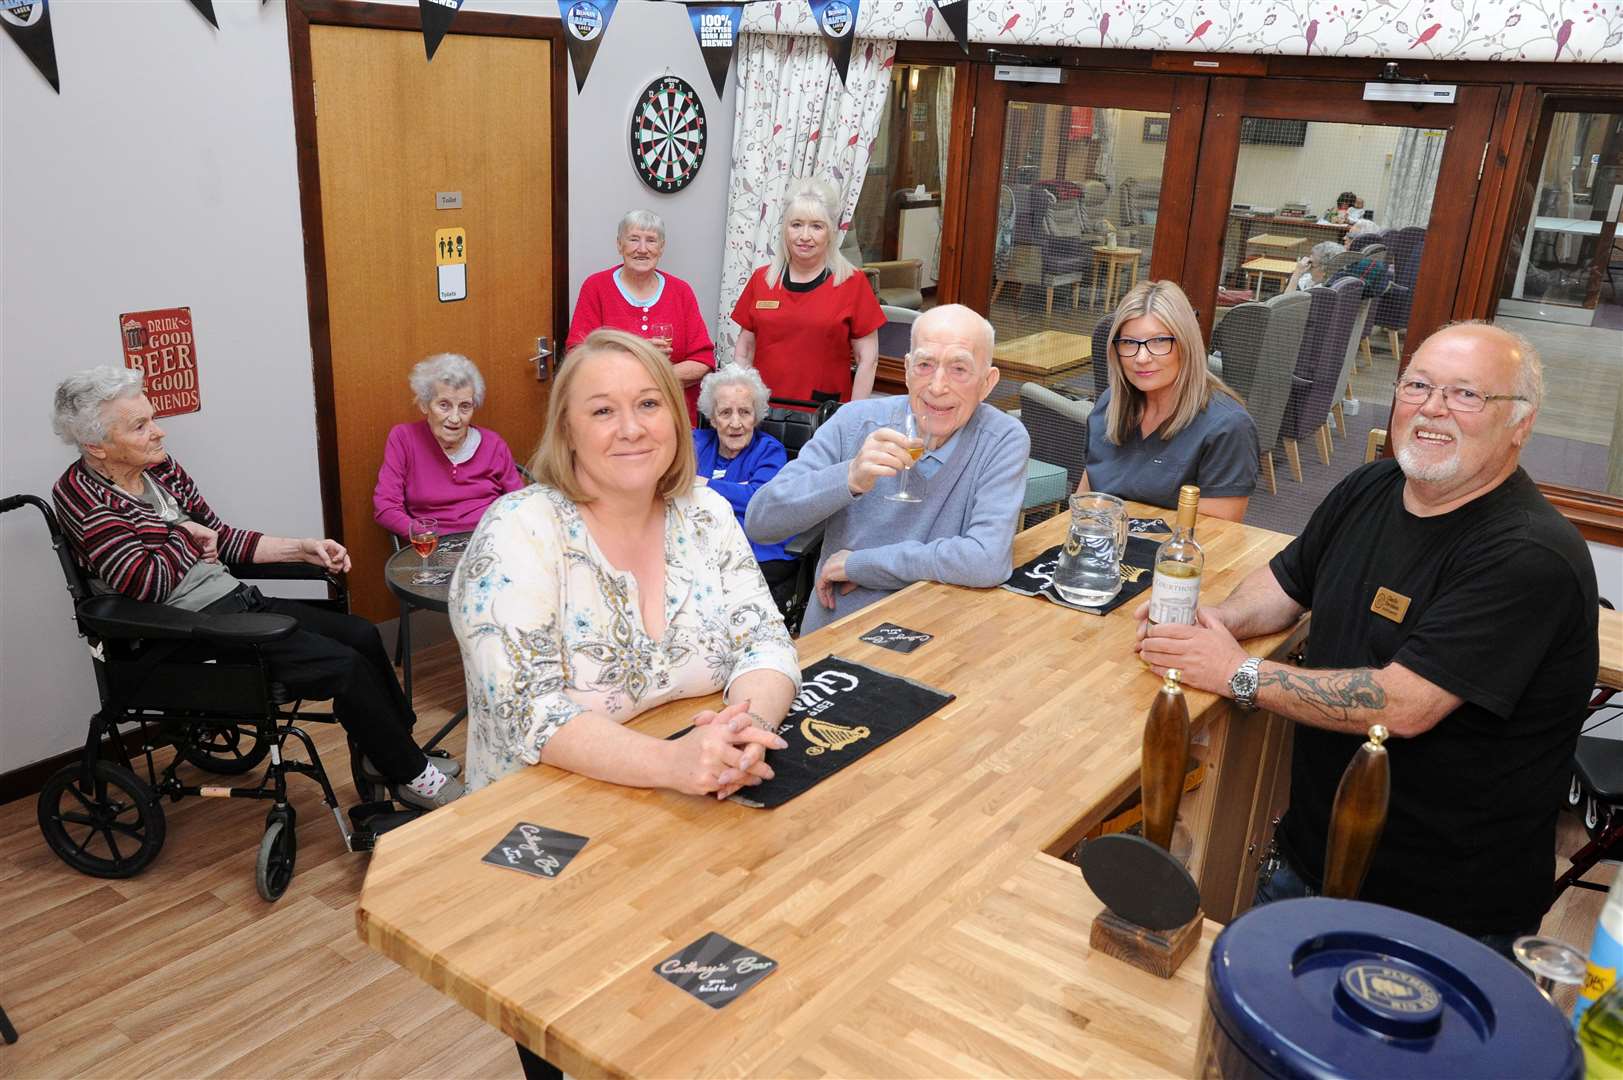 Cathay free bar manageress Elaine Crawford with 91-year-old resident George Garroee. Maintenance man Charlie Davidson (right) serves the drinks while activity co-ordinator Beverley Crawford (third centre) and other patrons wait.